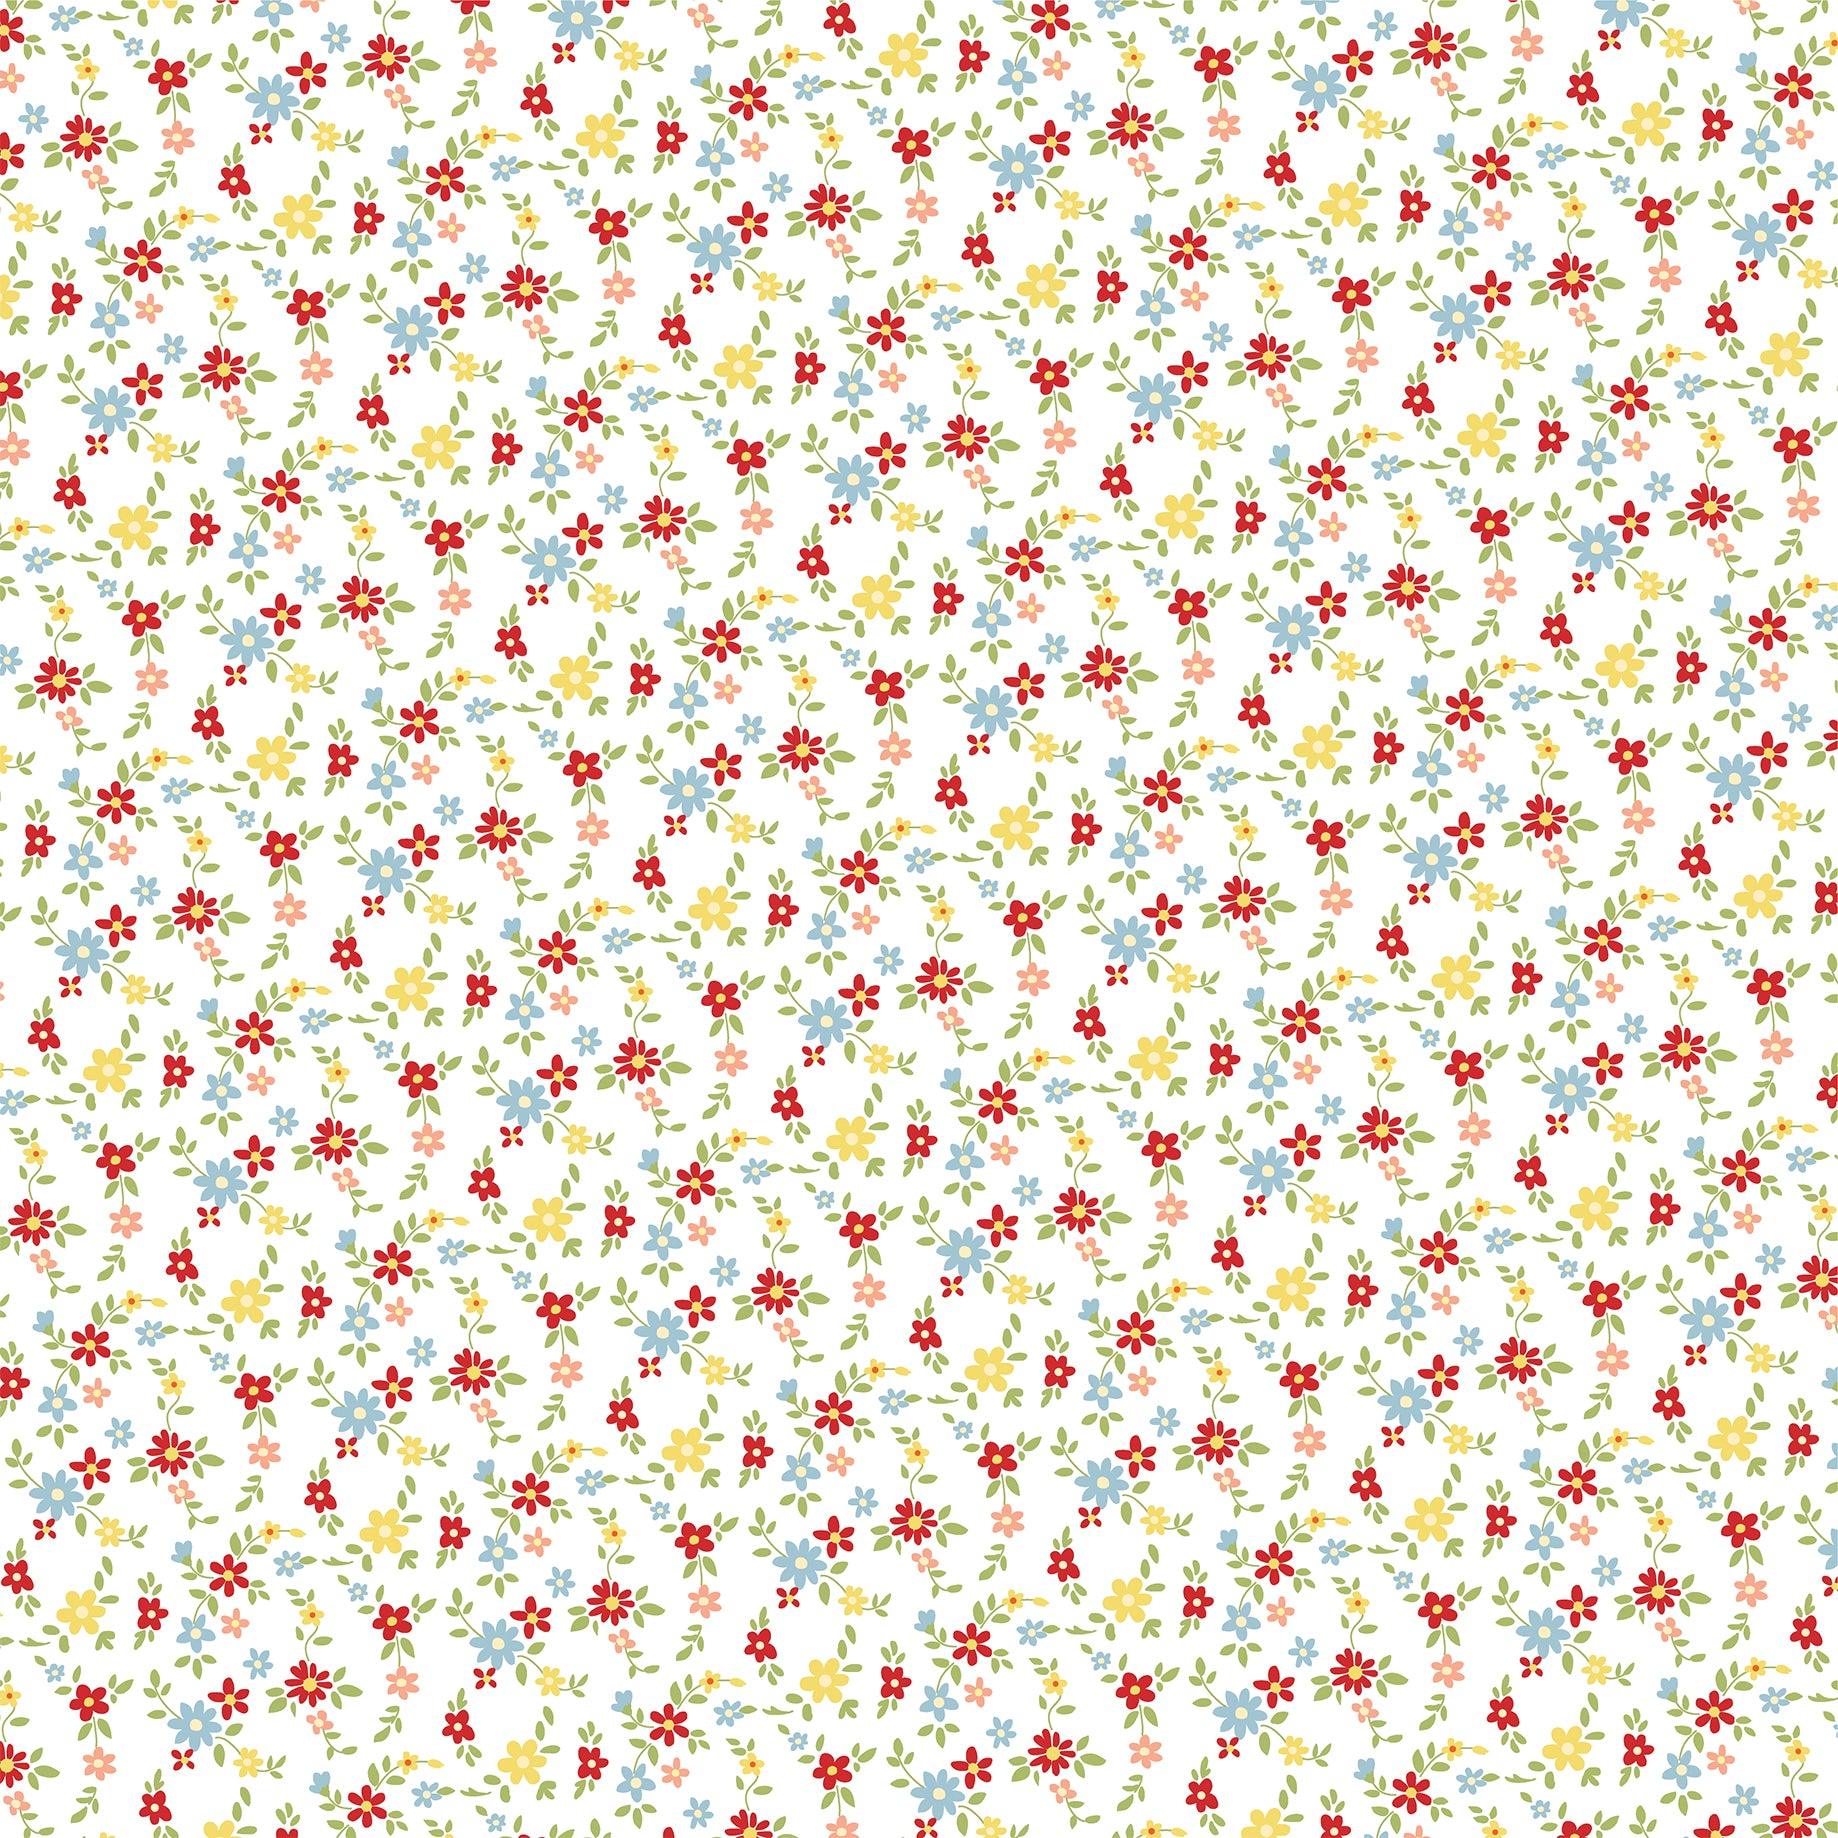 Farmhouse Living Collection Farm Grown 12 x 12 Double-Sided Scrapbook Paper by Carta Bella - Scrapbook Supply Companies